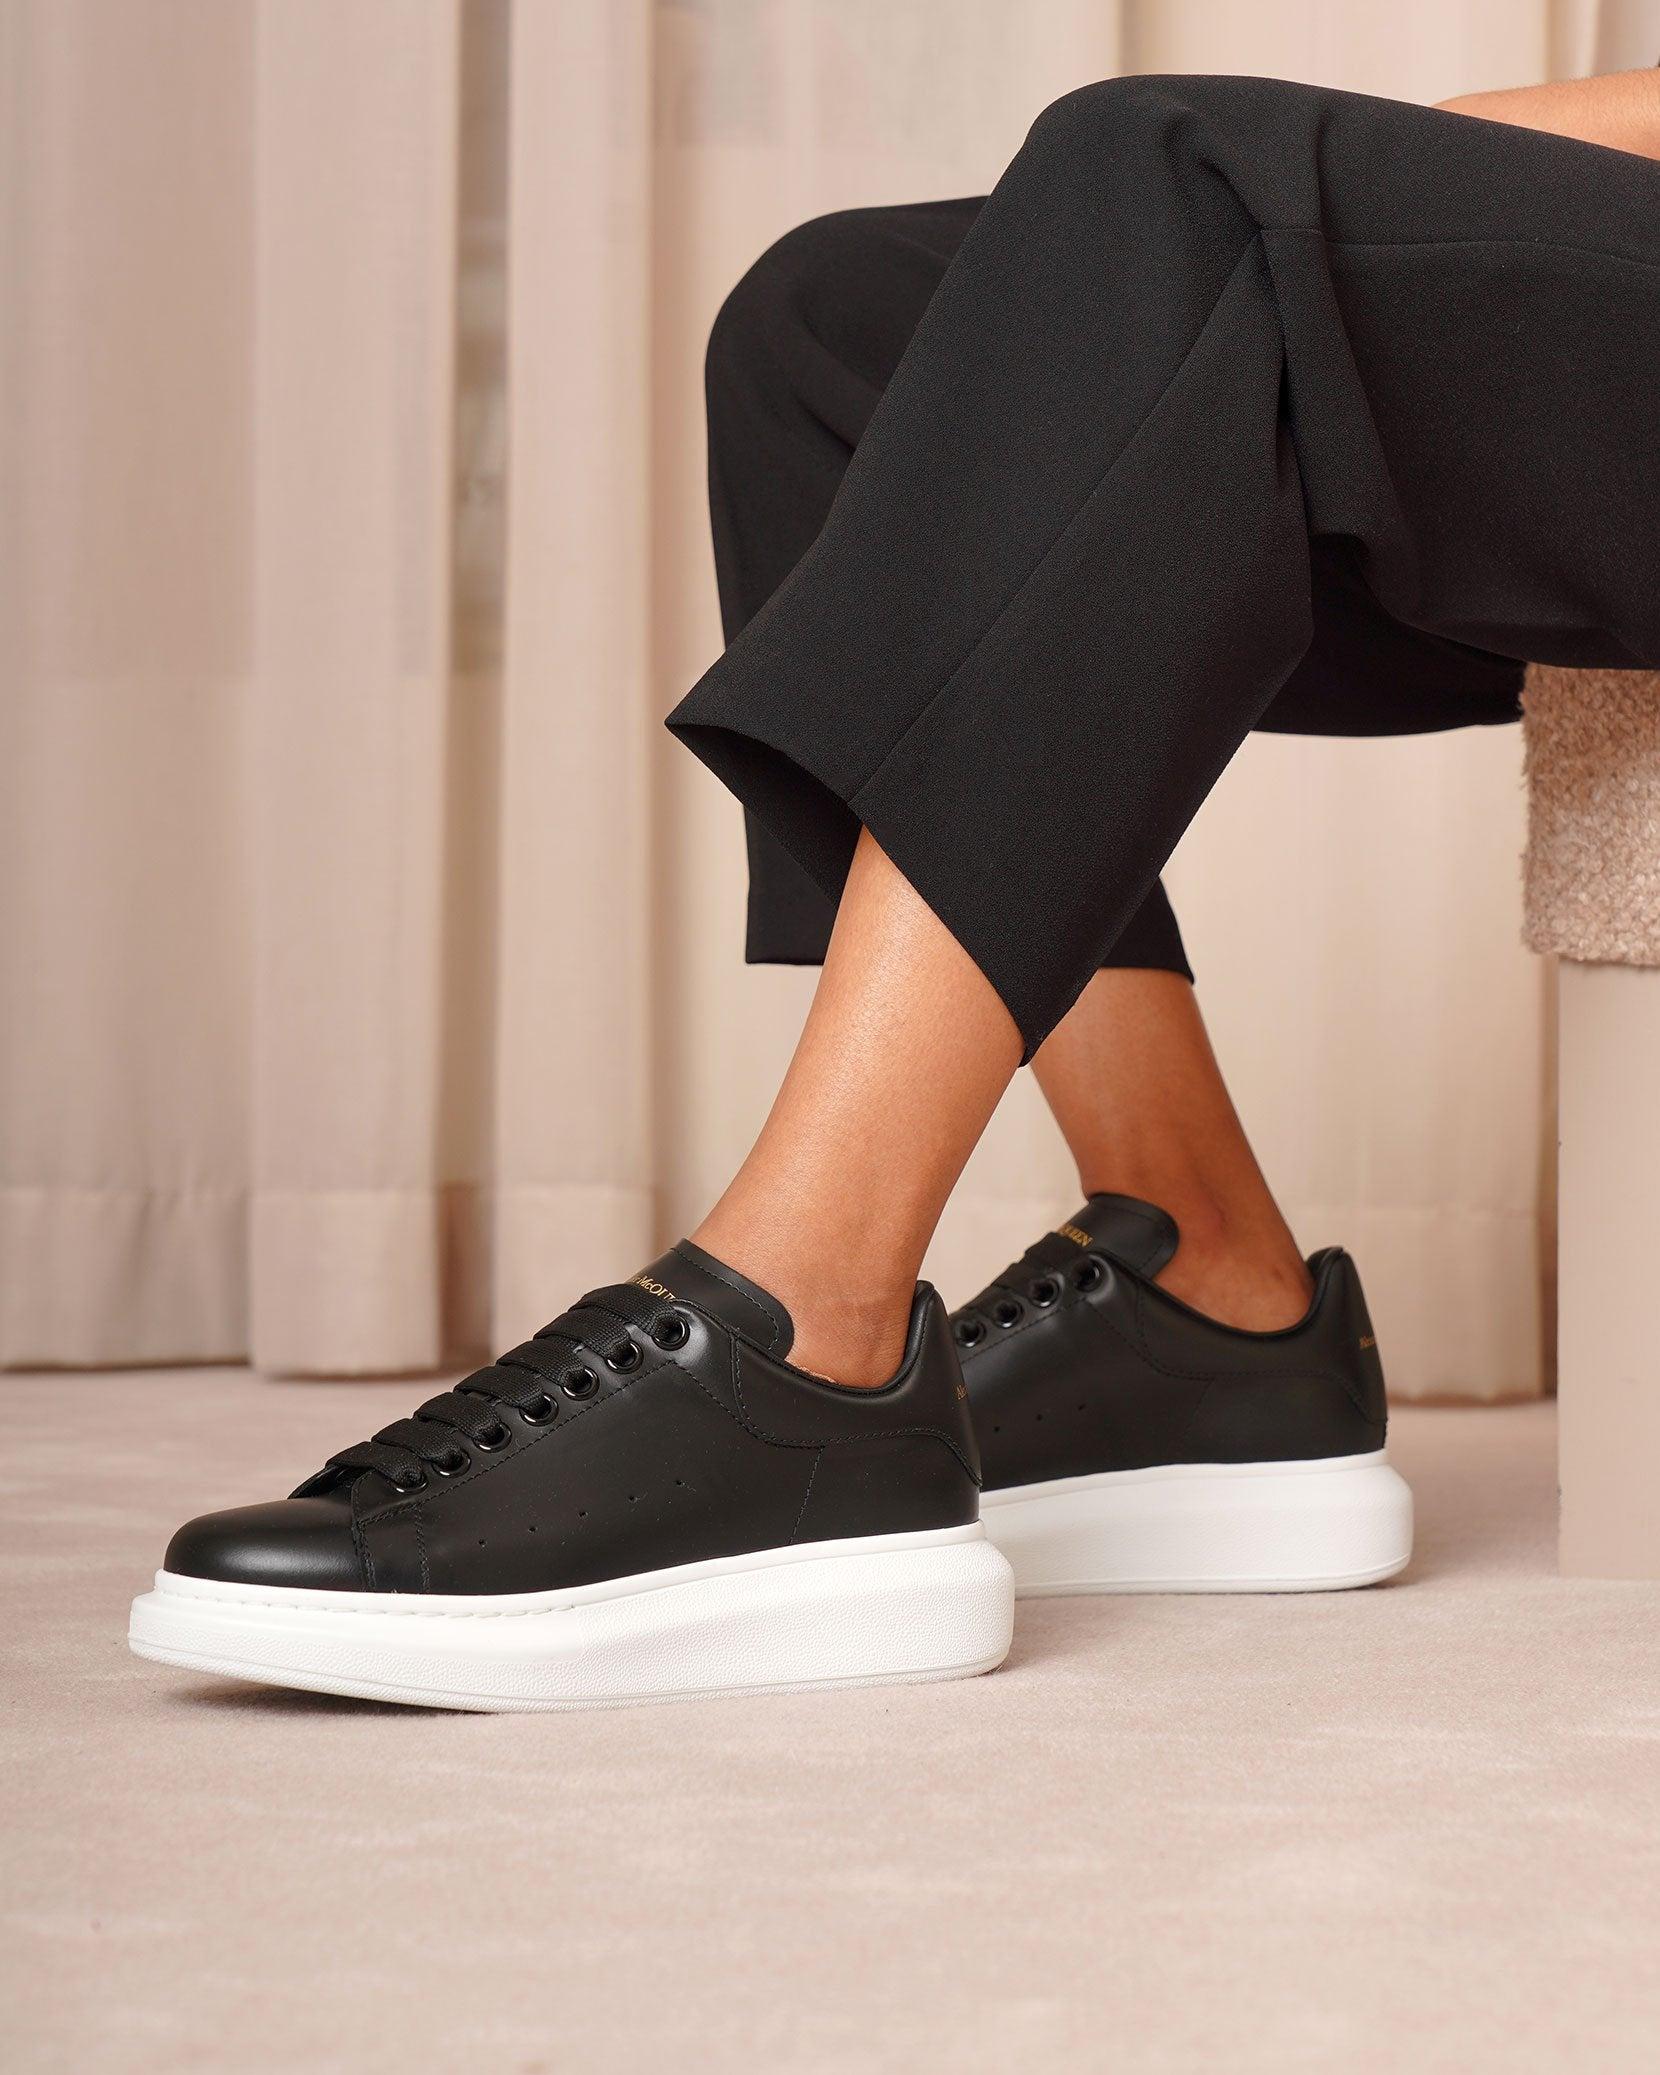 Alexander McQueen Leather Sneakers Black - Save 22% - Lyst